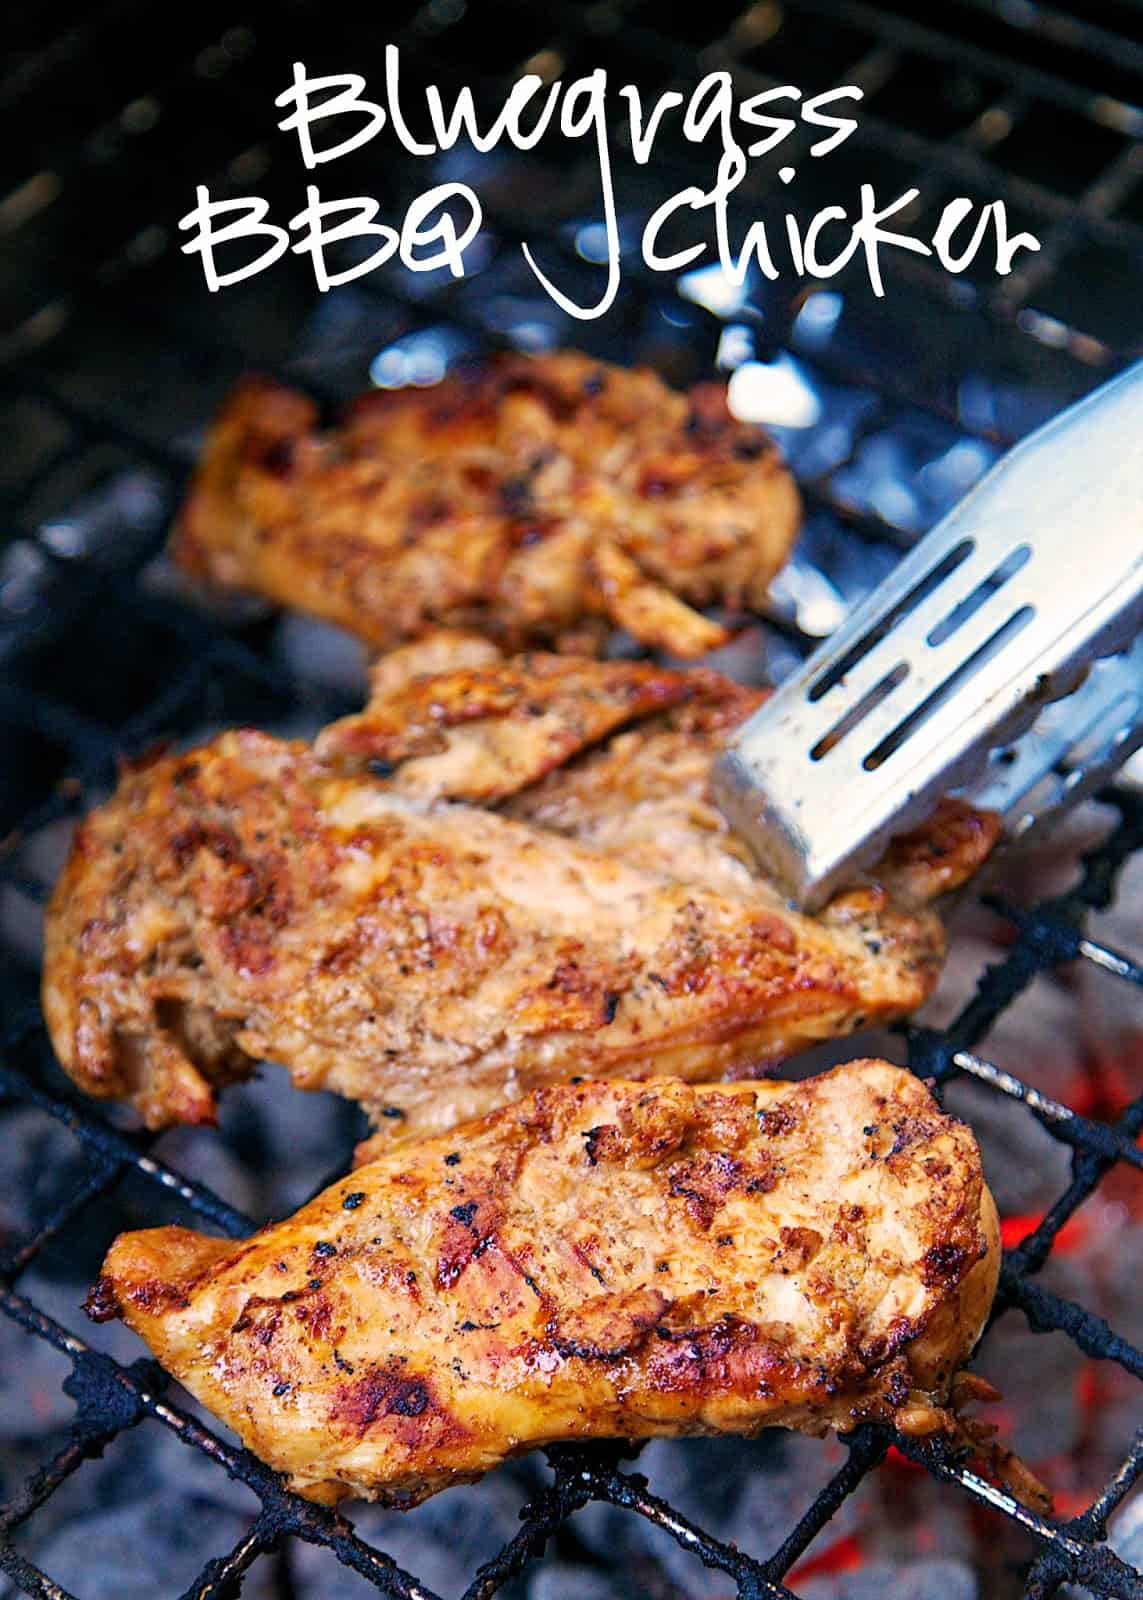 Bluegrass BBQ Chicken Recipe - chicken marinated in a tangy vinegar based bbq sauce - Seriously one of the best grilled chicken recipes we've ever made! Make extra chicken for leftovers - you're going to want it!